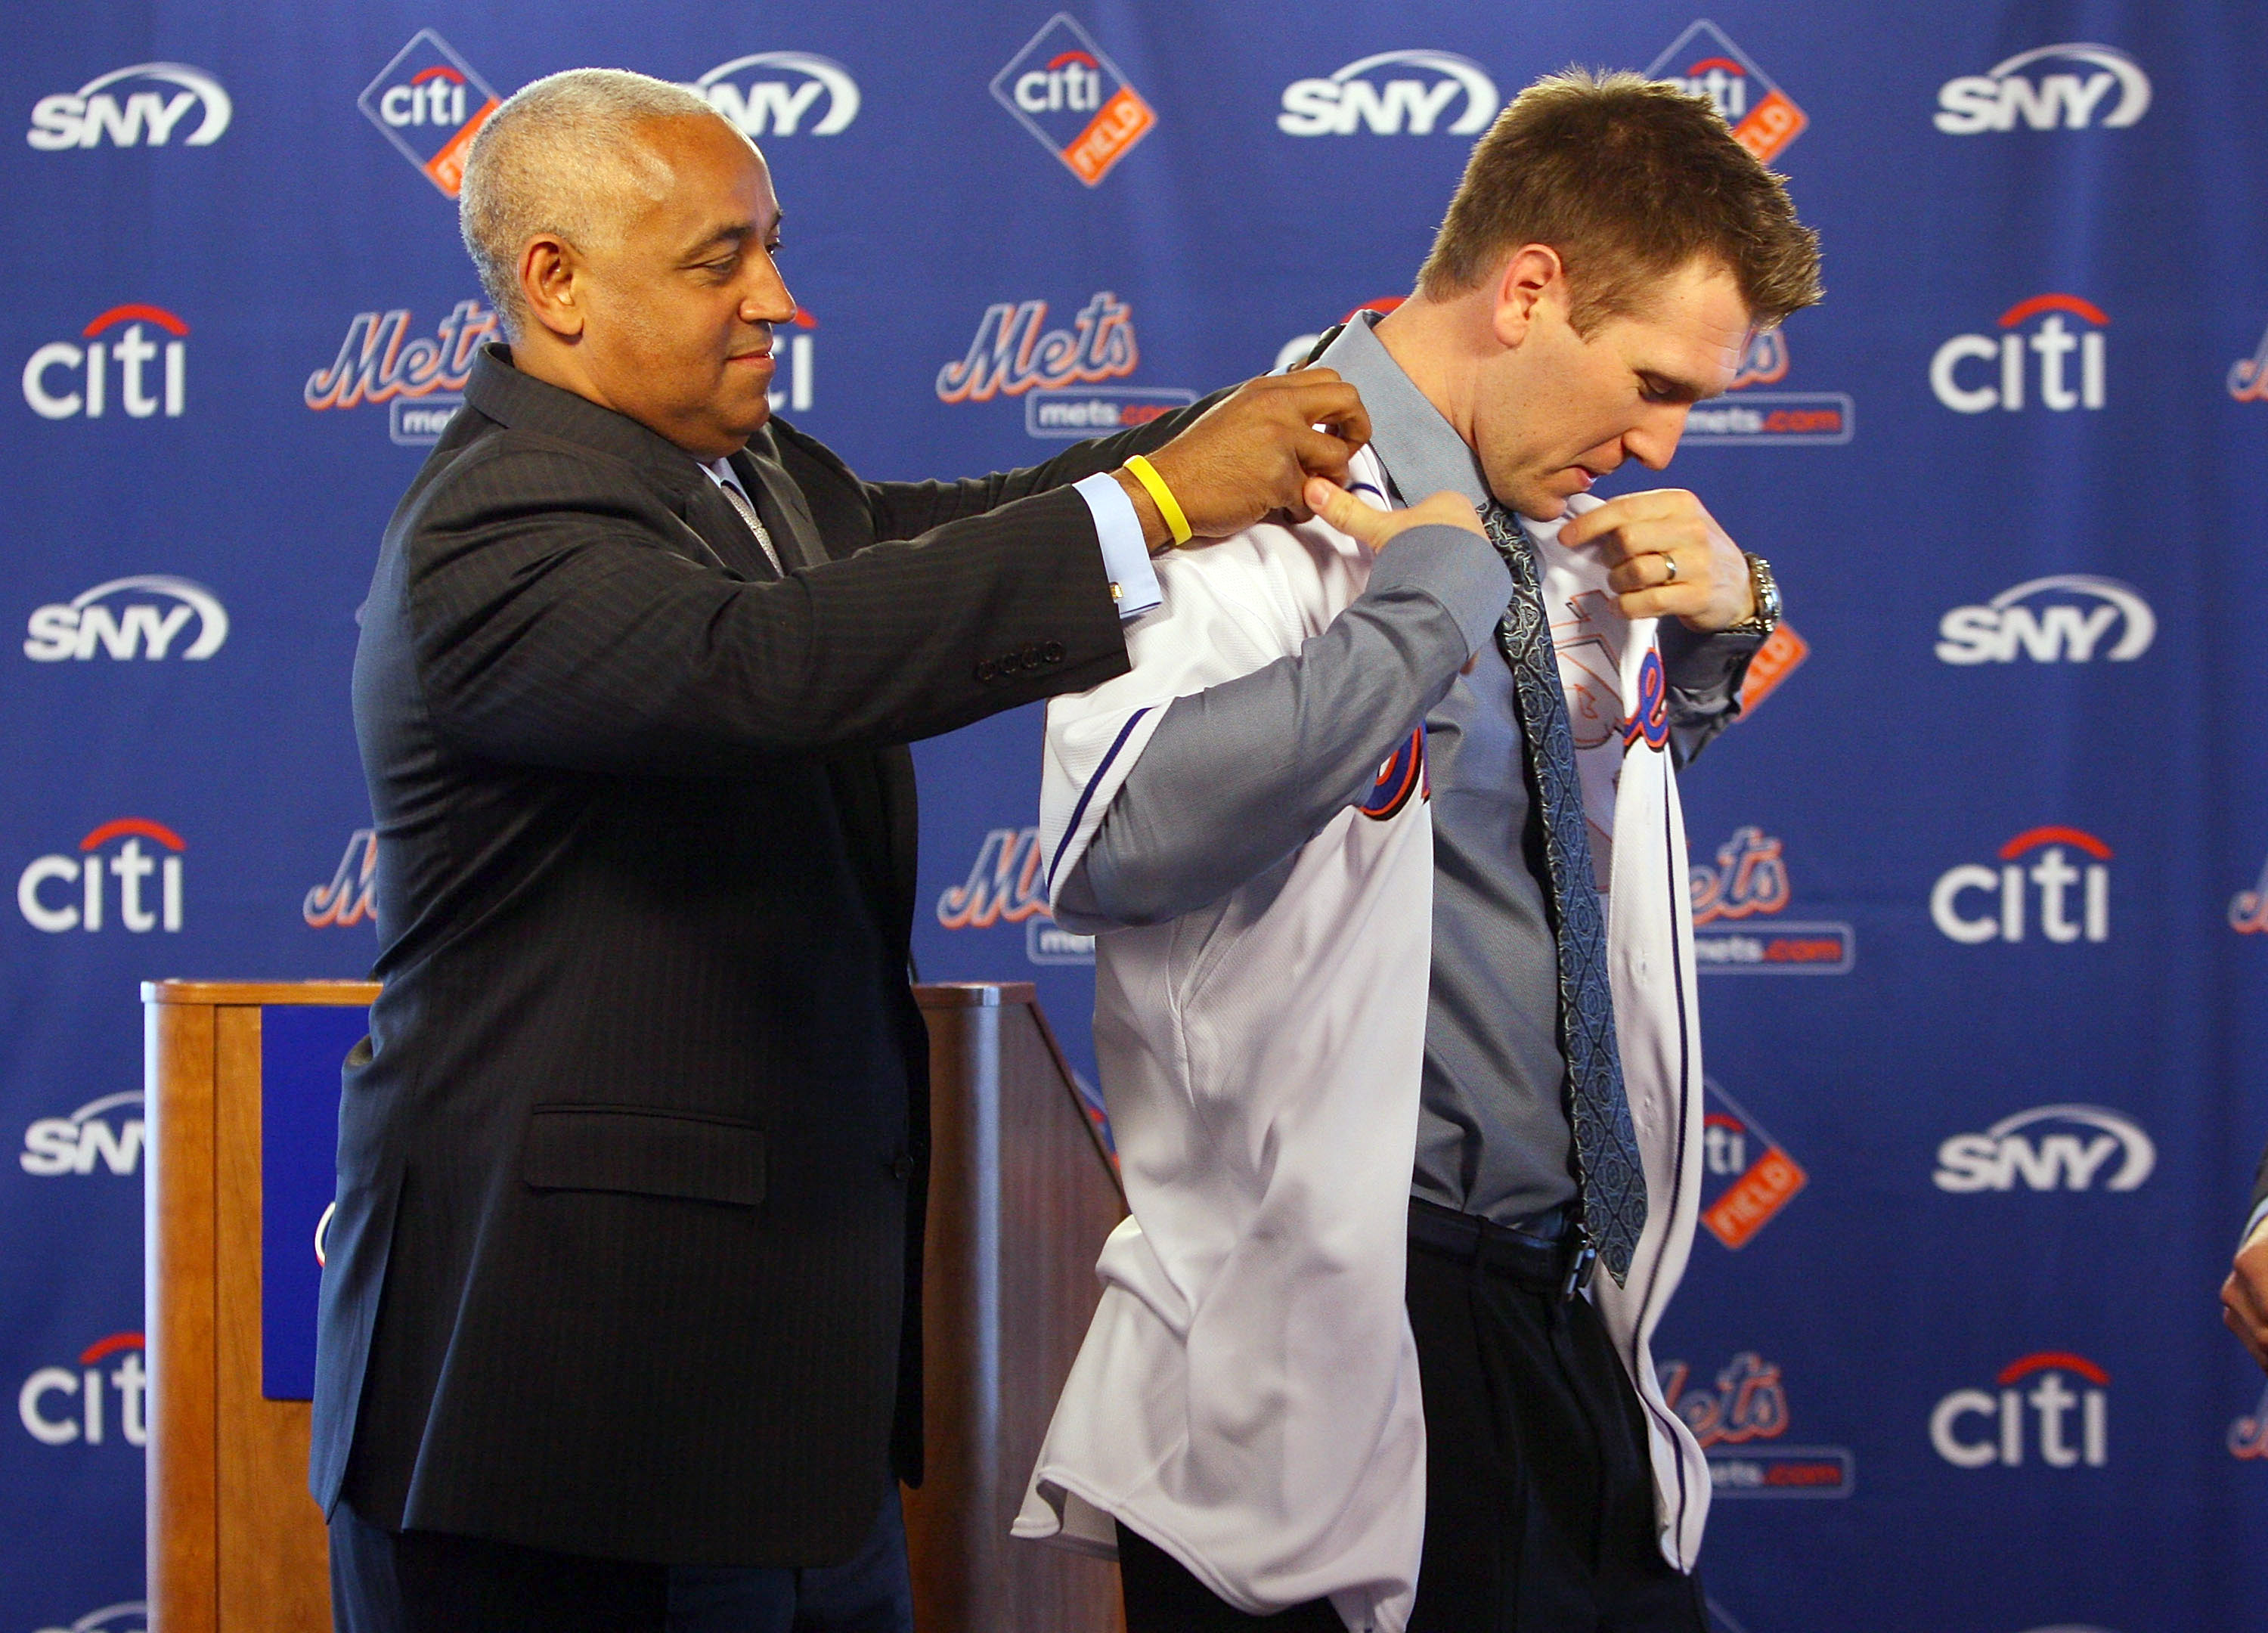 NEW YORK - JANUARY 05:  General manager Omar Minaya helps Jason Bay try on his jersey during a press conference to announce Bay's signing to the New York Mets on January 5, 2010 at Citi Field in the Flushing neighborhood of the Queens borough of New York